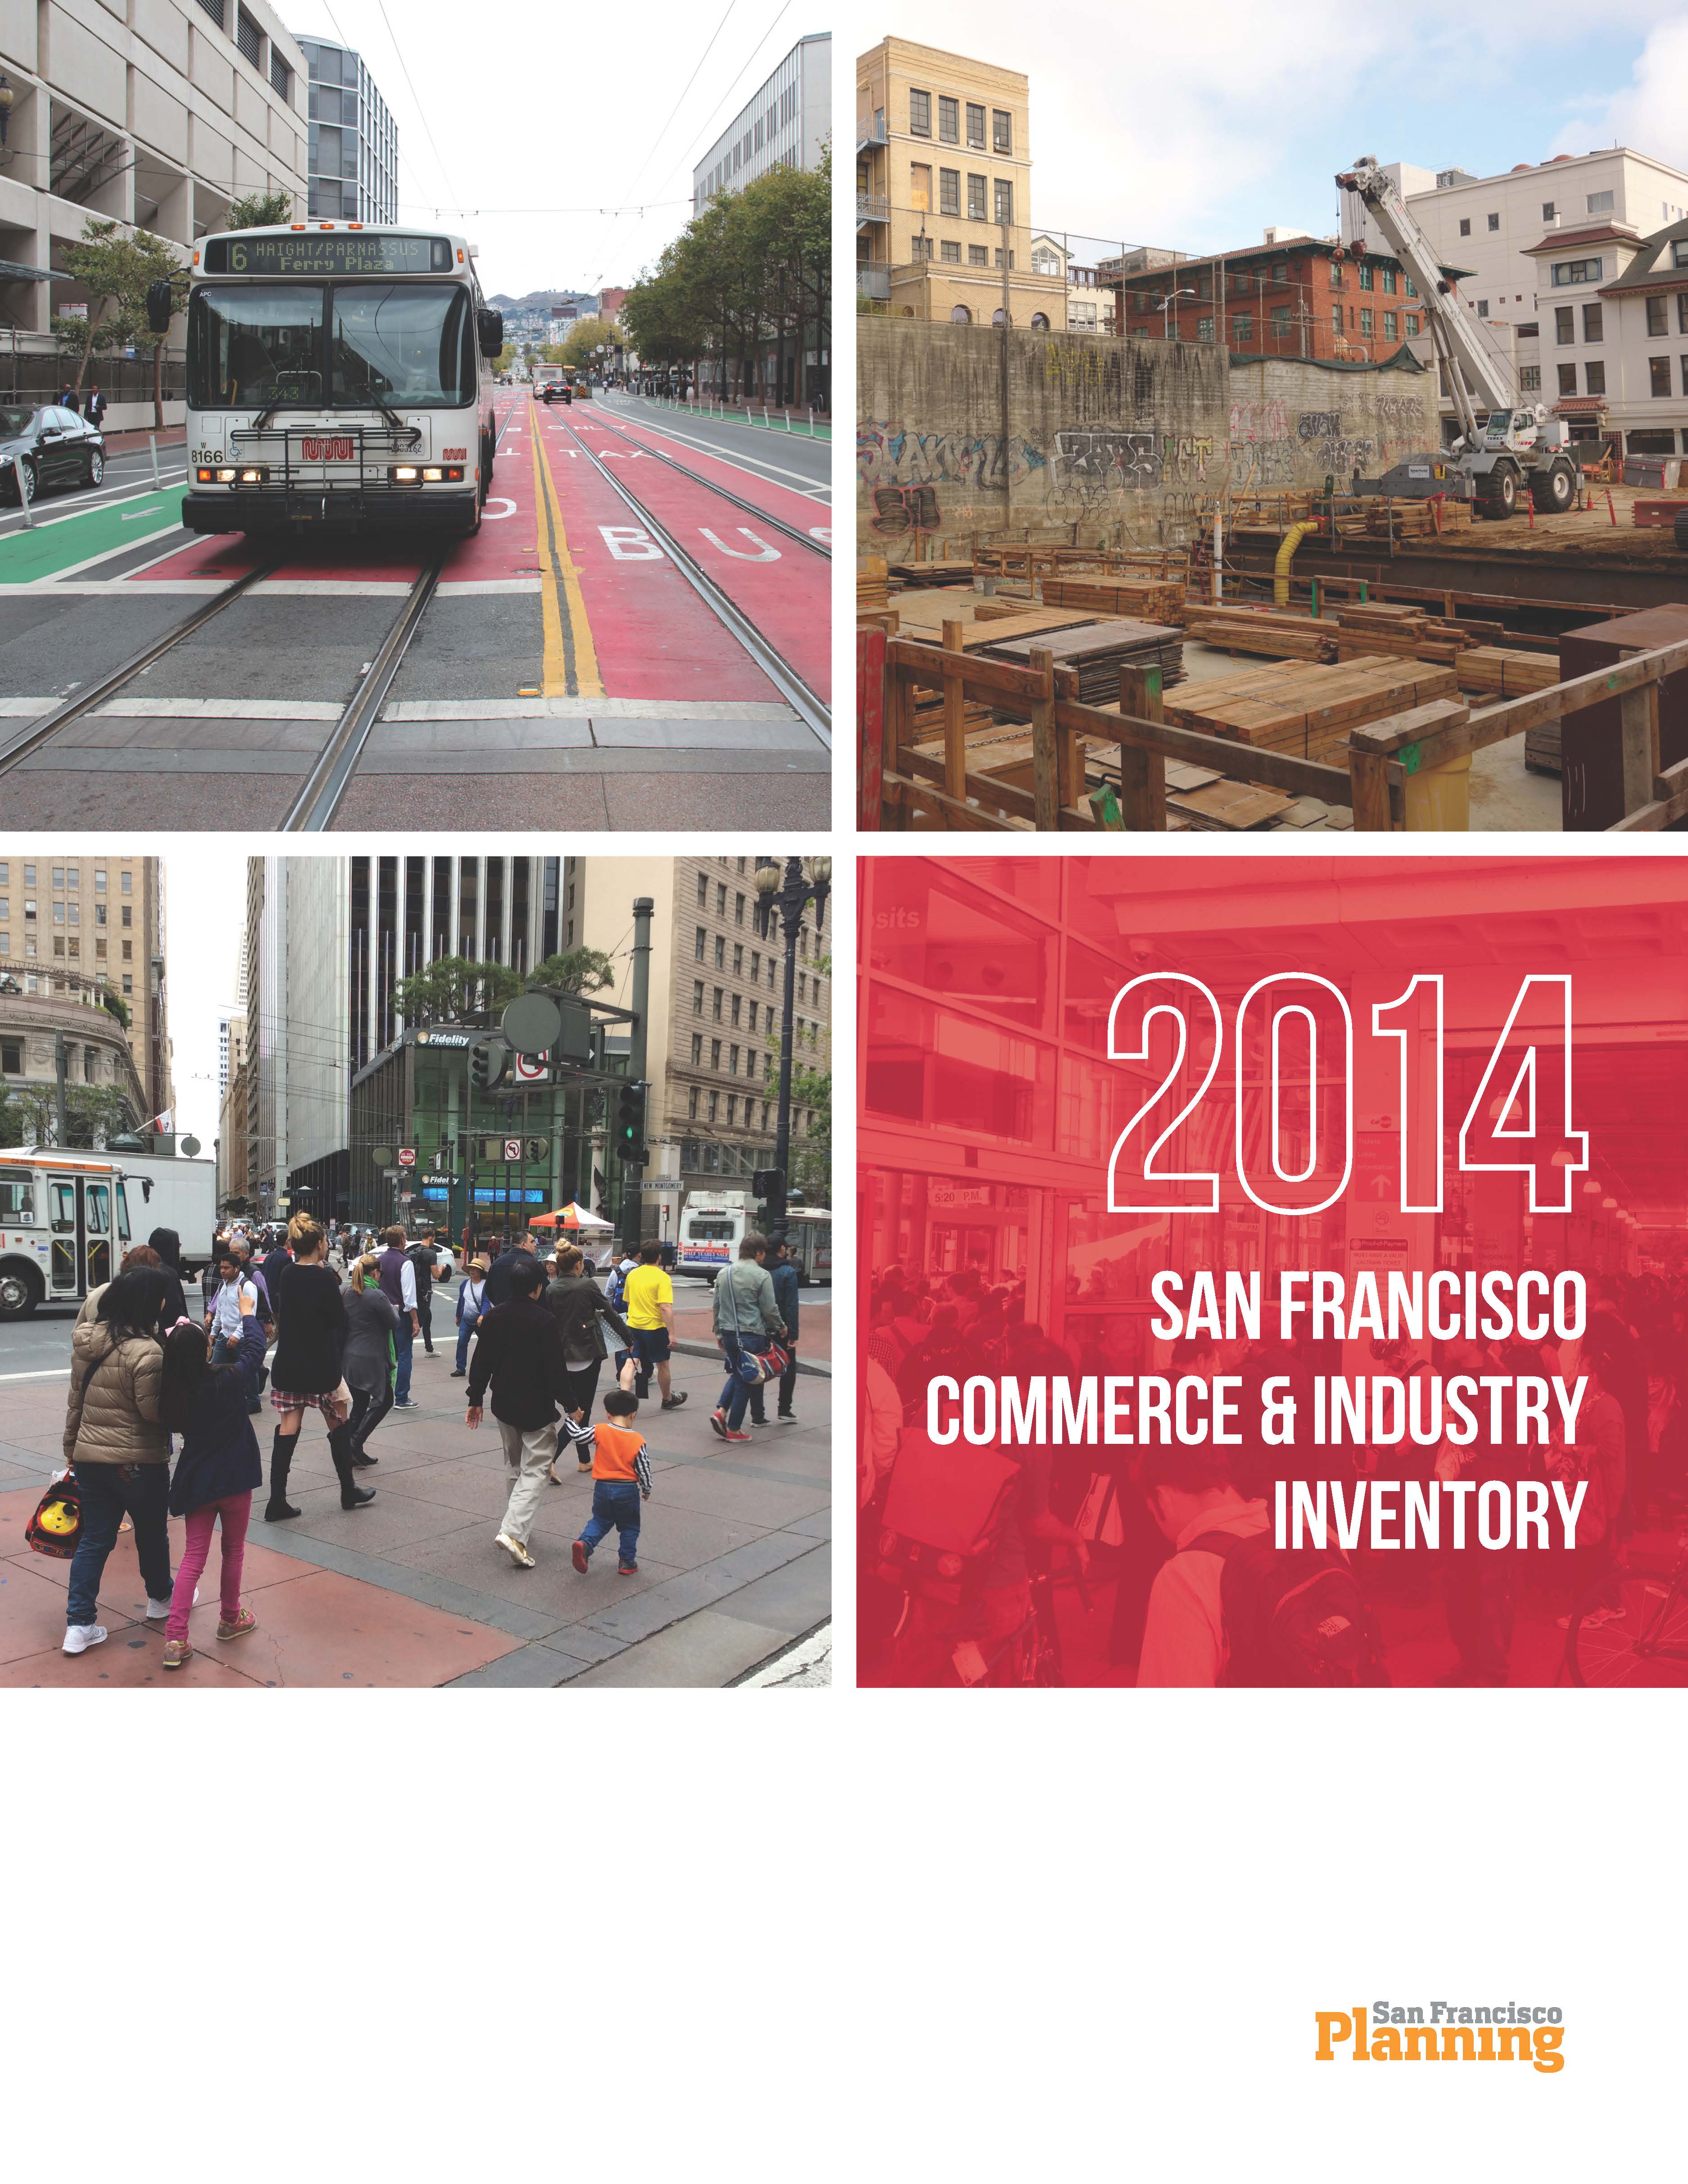 Cover Image for the 2014 Commerce & Industry Inventory Report